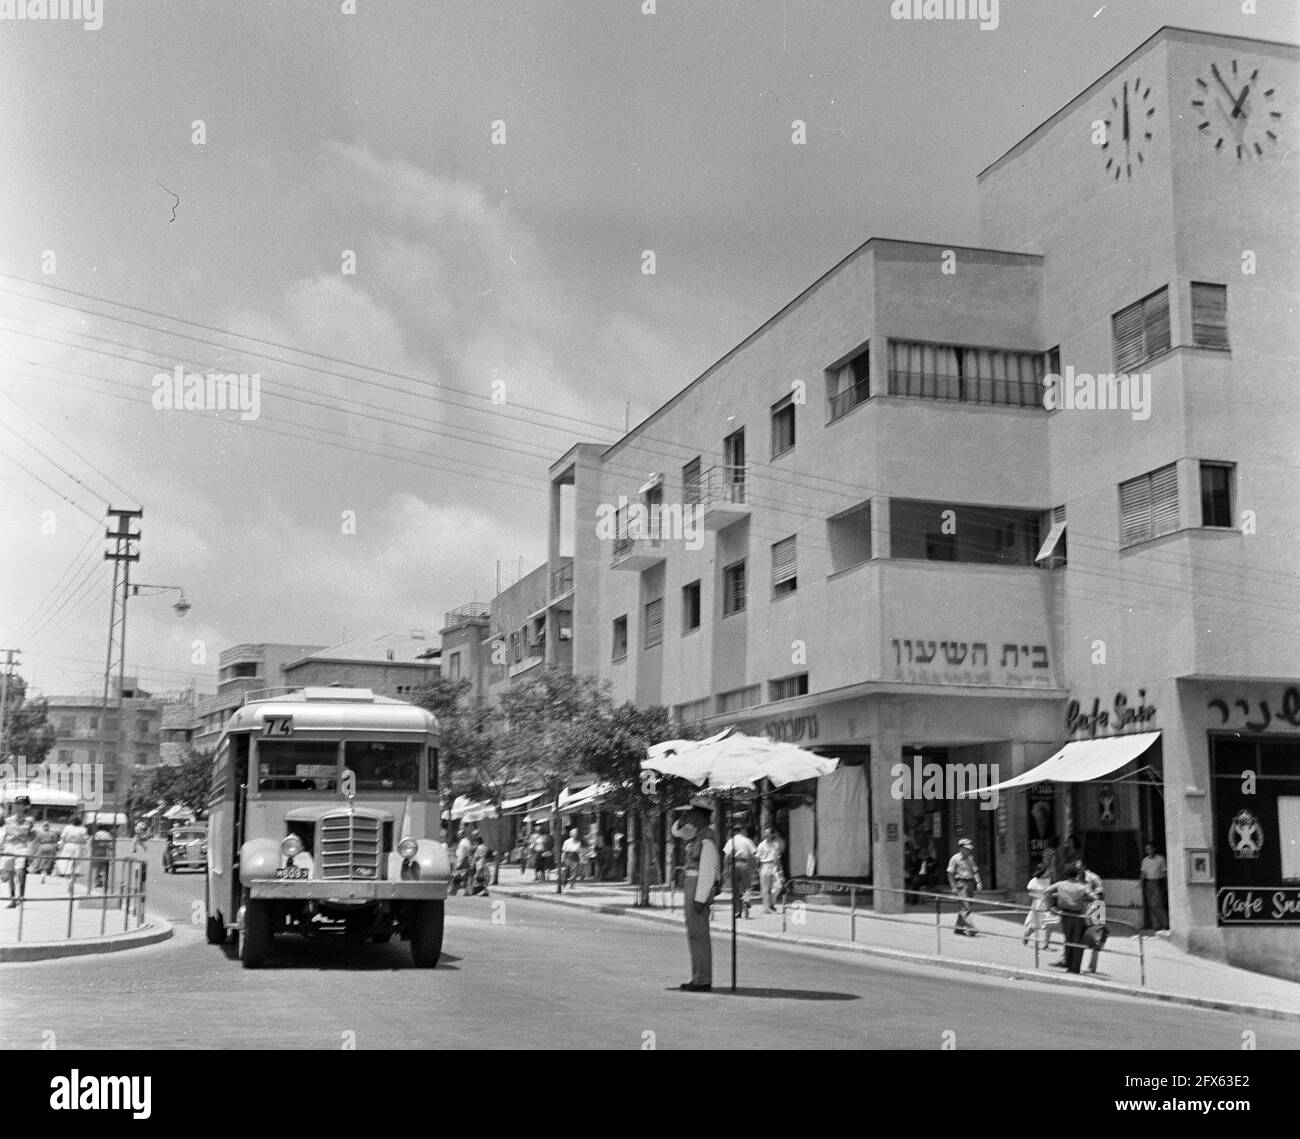 Haifa. Traffic cop under a parasol at a downtown intersection. January 1, 1948, The Netherlands, 20th century press agency photo, news to remember, documentary, historic photography 1945-1990, visual stories, human history of the Twentieth Century, capturing moments in time Stock Photo